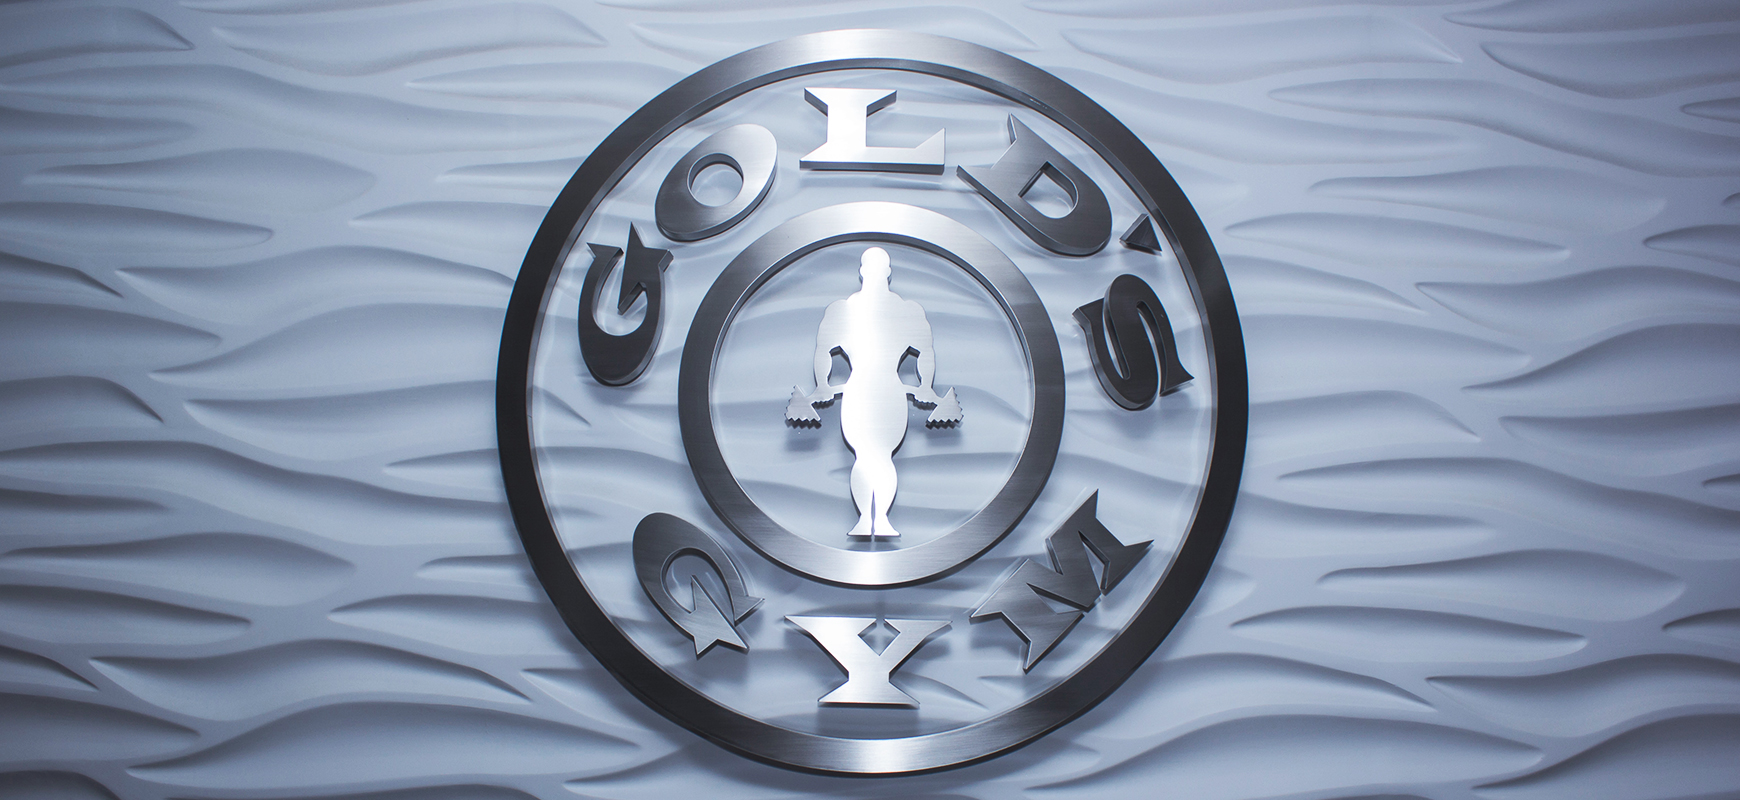 Gold's Gym brushed aluminum logo sign in a round shape for branding